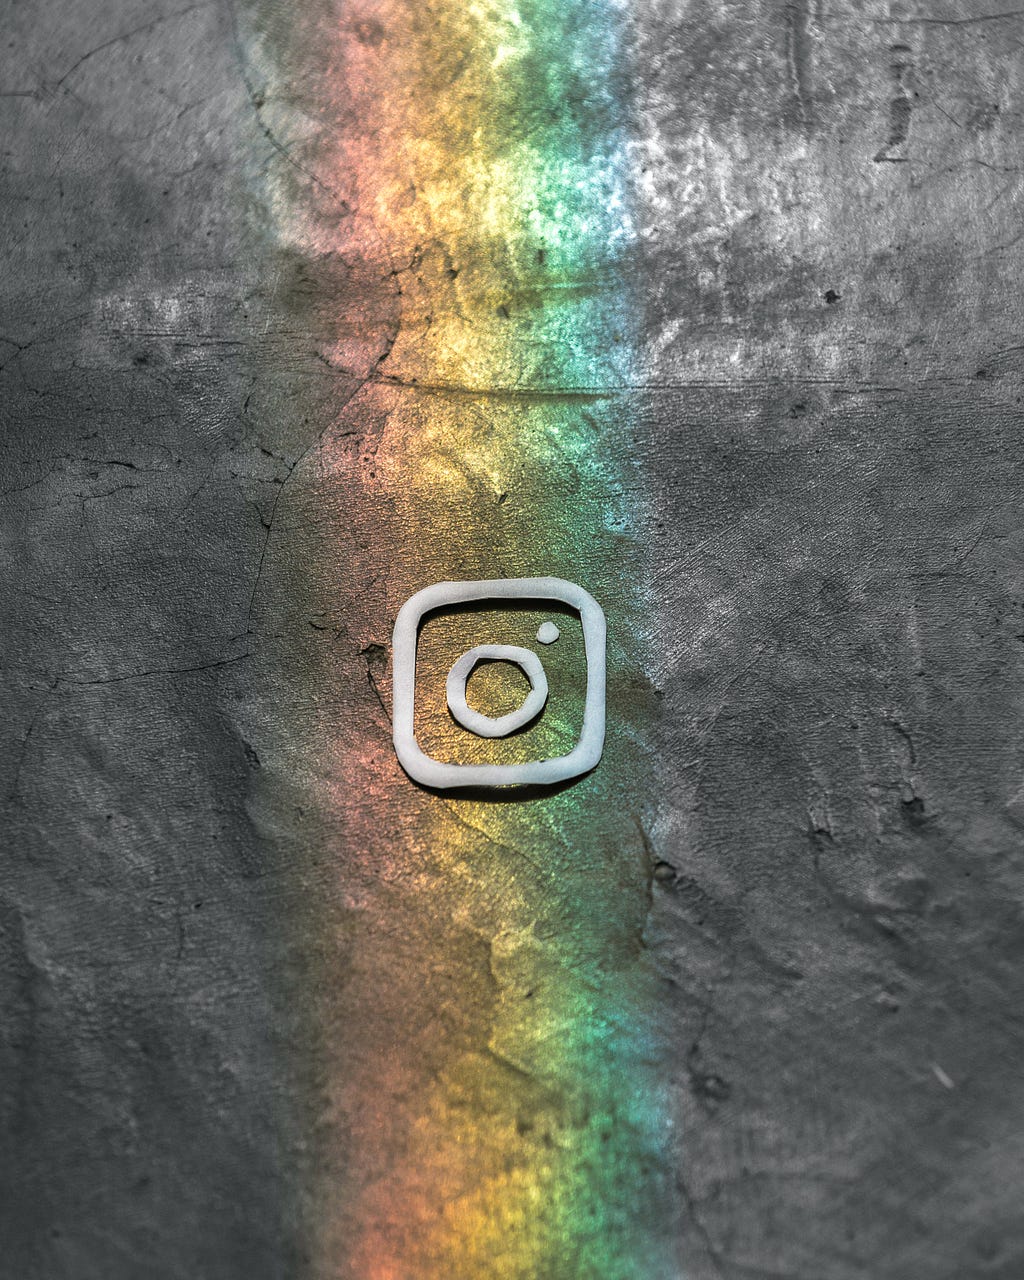 Logo of Instagram in a rustic background having beautiful colors